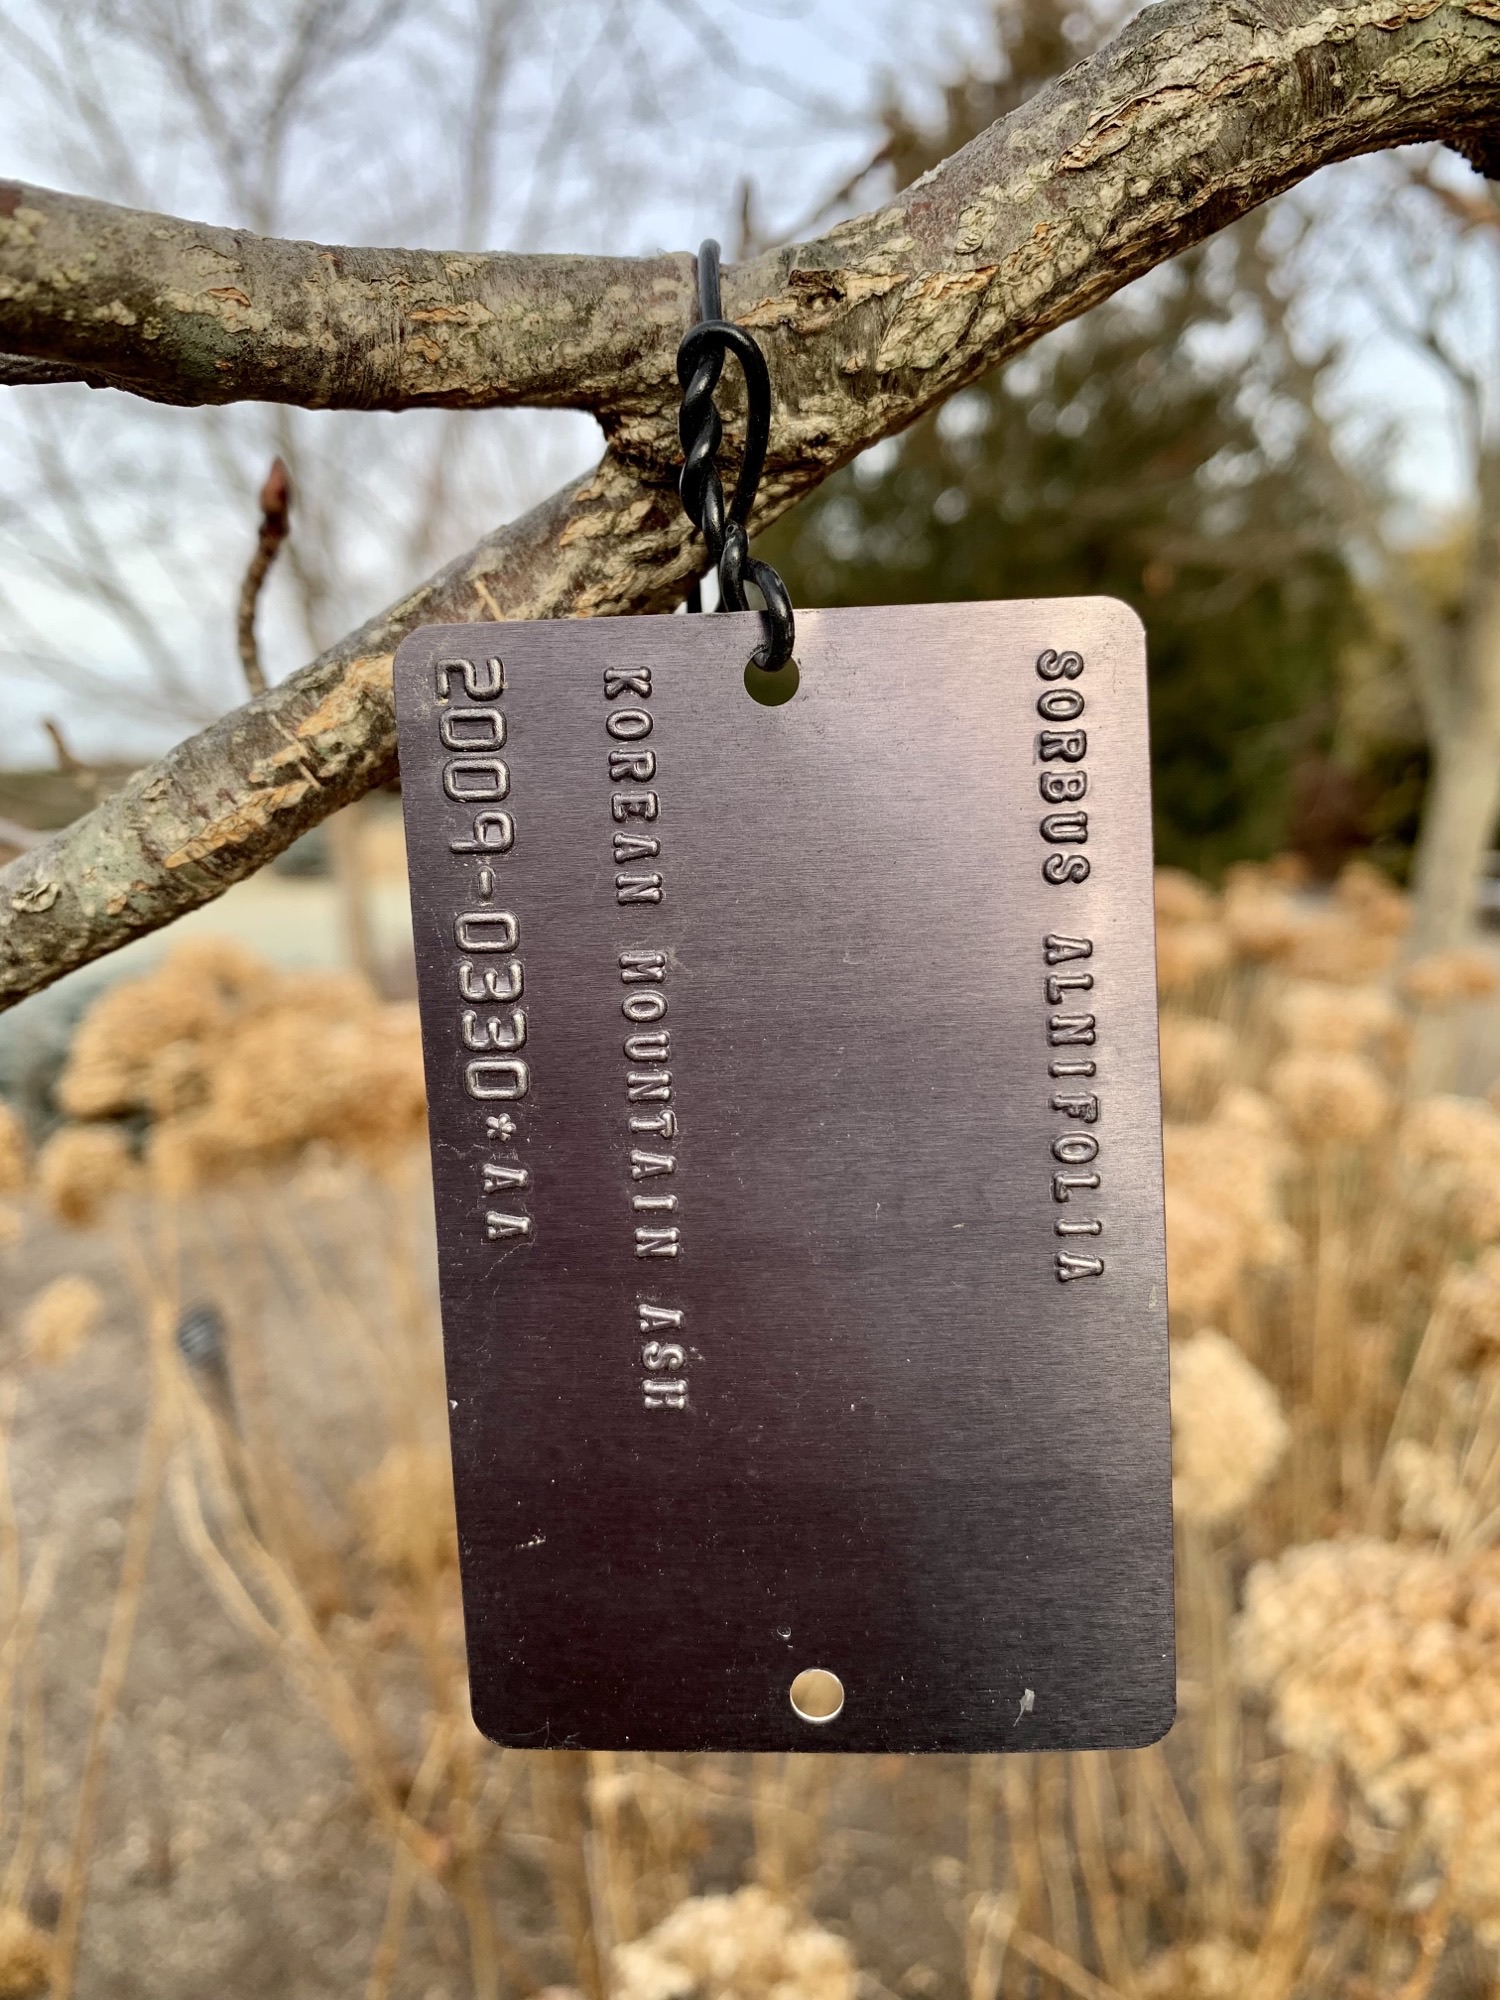 plant identification tag hanging from tree branch